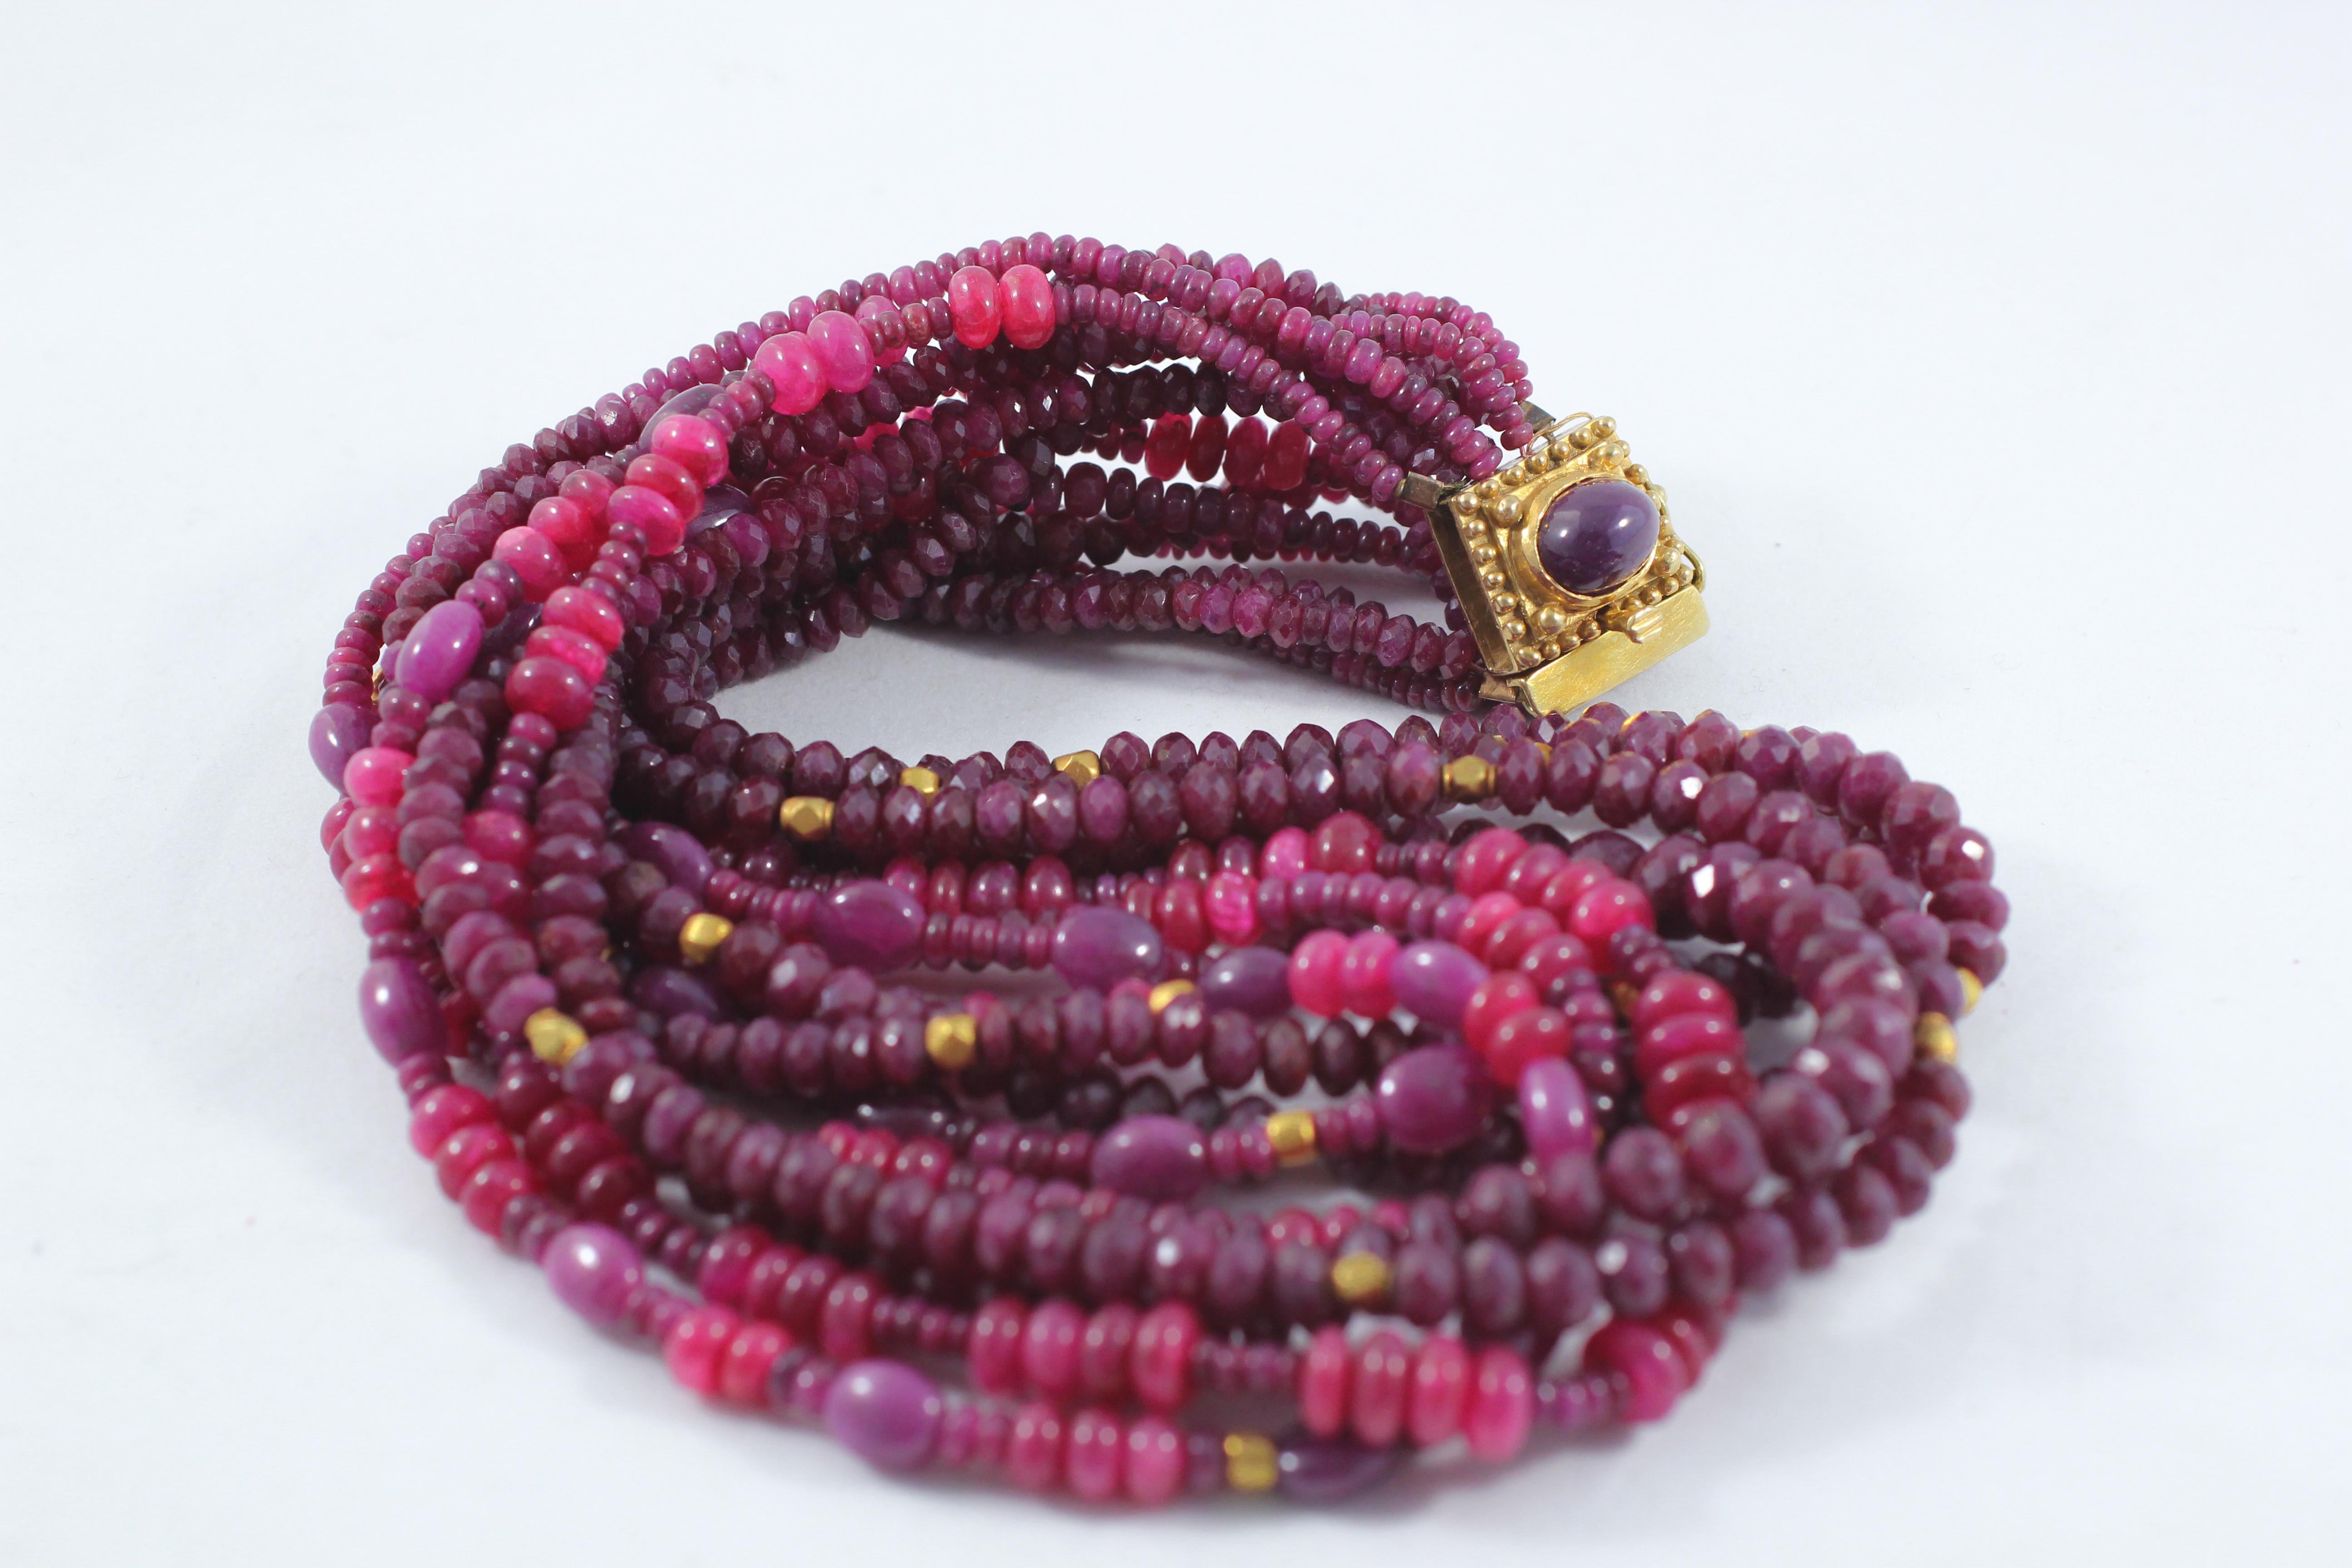 The ruby and 18K gold beaded handmade choker necklace. Nicely faceted ruby beads are sparsely speckled by round bead spacers in recycled 18k gold. A handmade clasp with a bezel set ruby terminates this beautiful luscious necklace and adds drama and